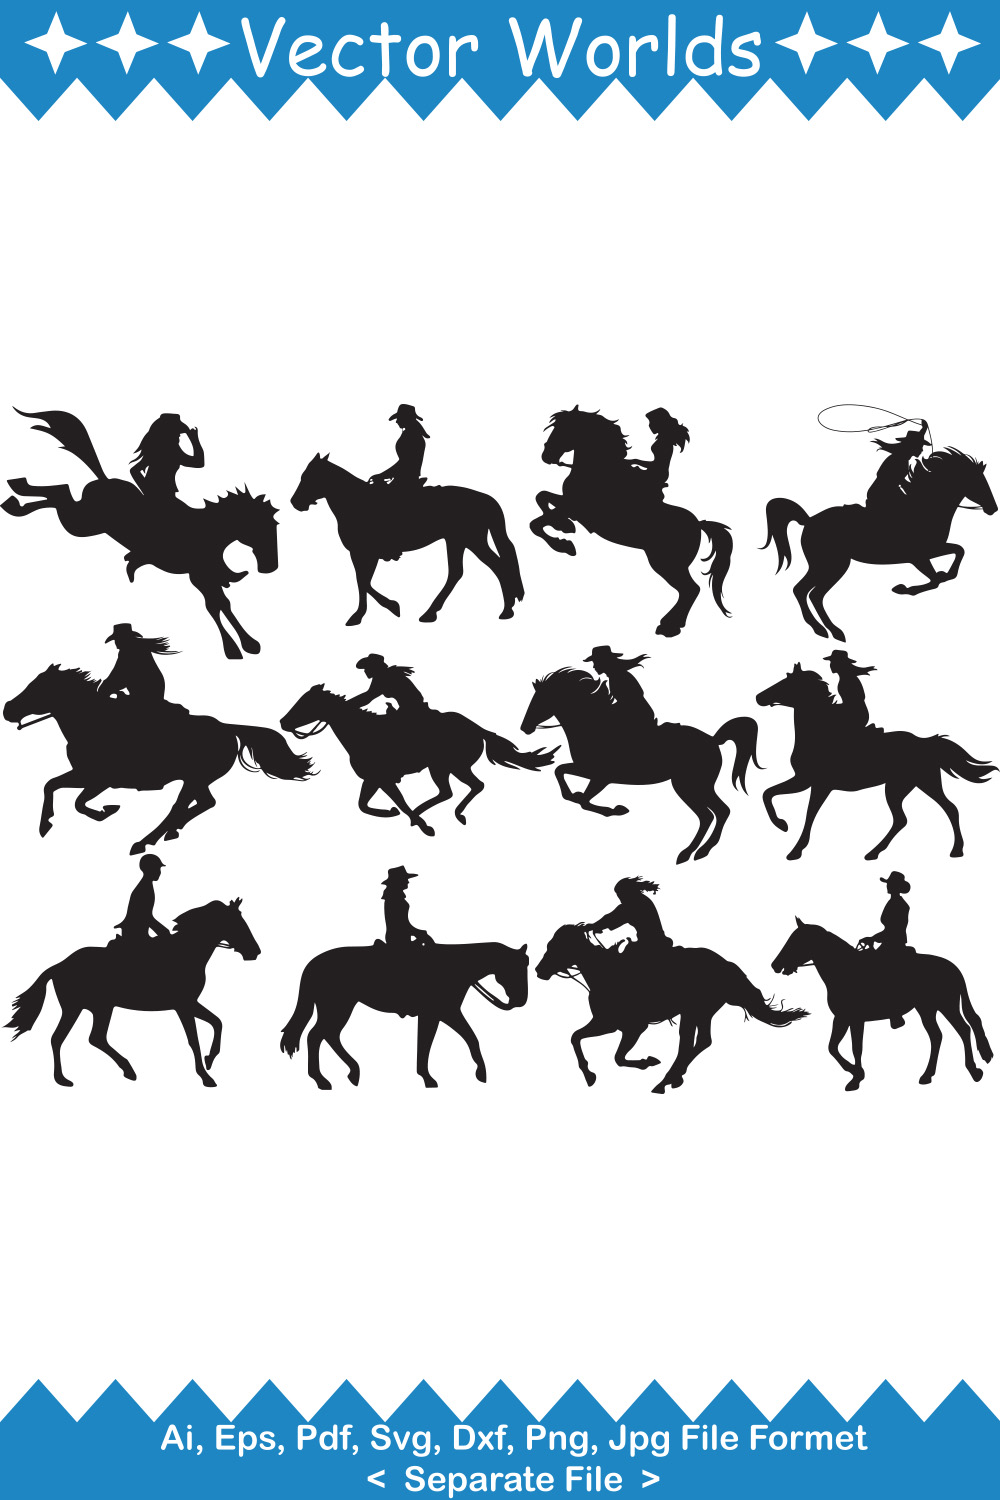 Set of amazing vector images of silhouettes of a cowgirl on a horse